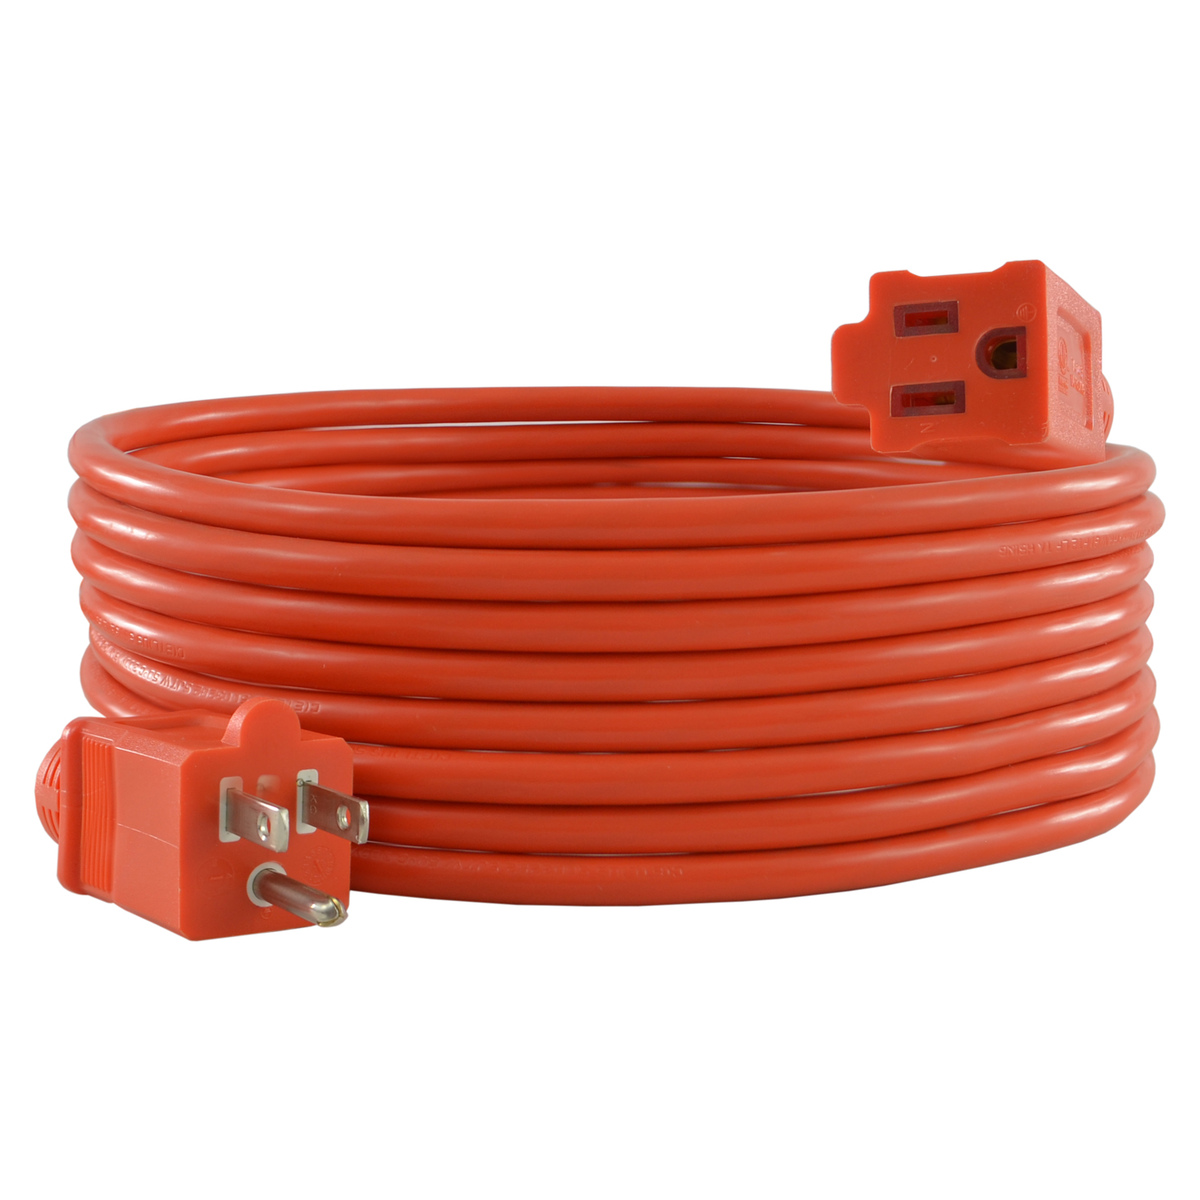 What Does 16 Gauge Extension Cord Mean